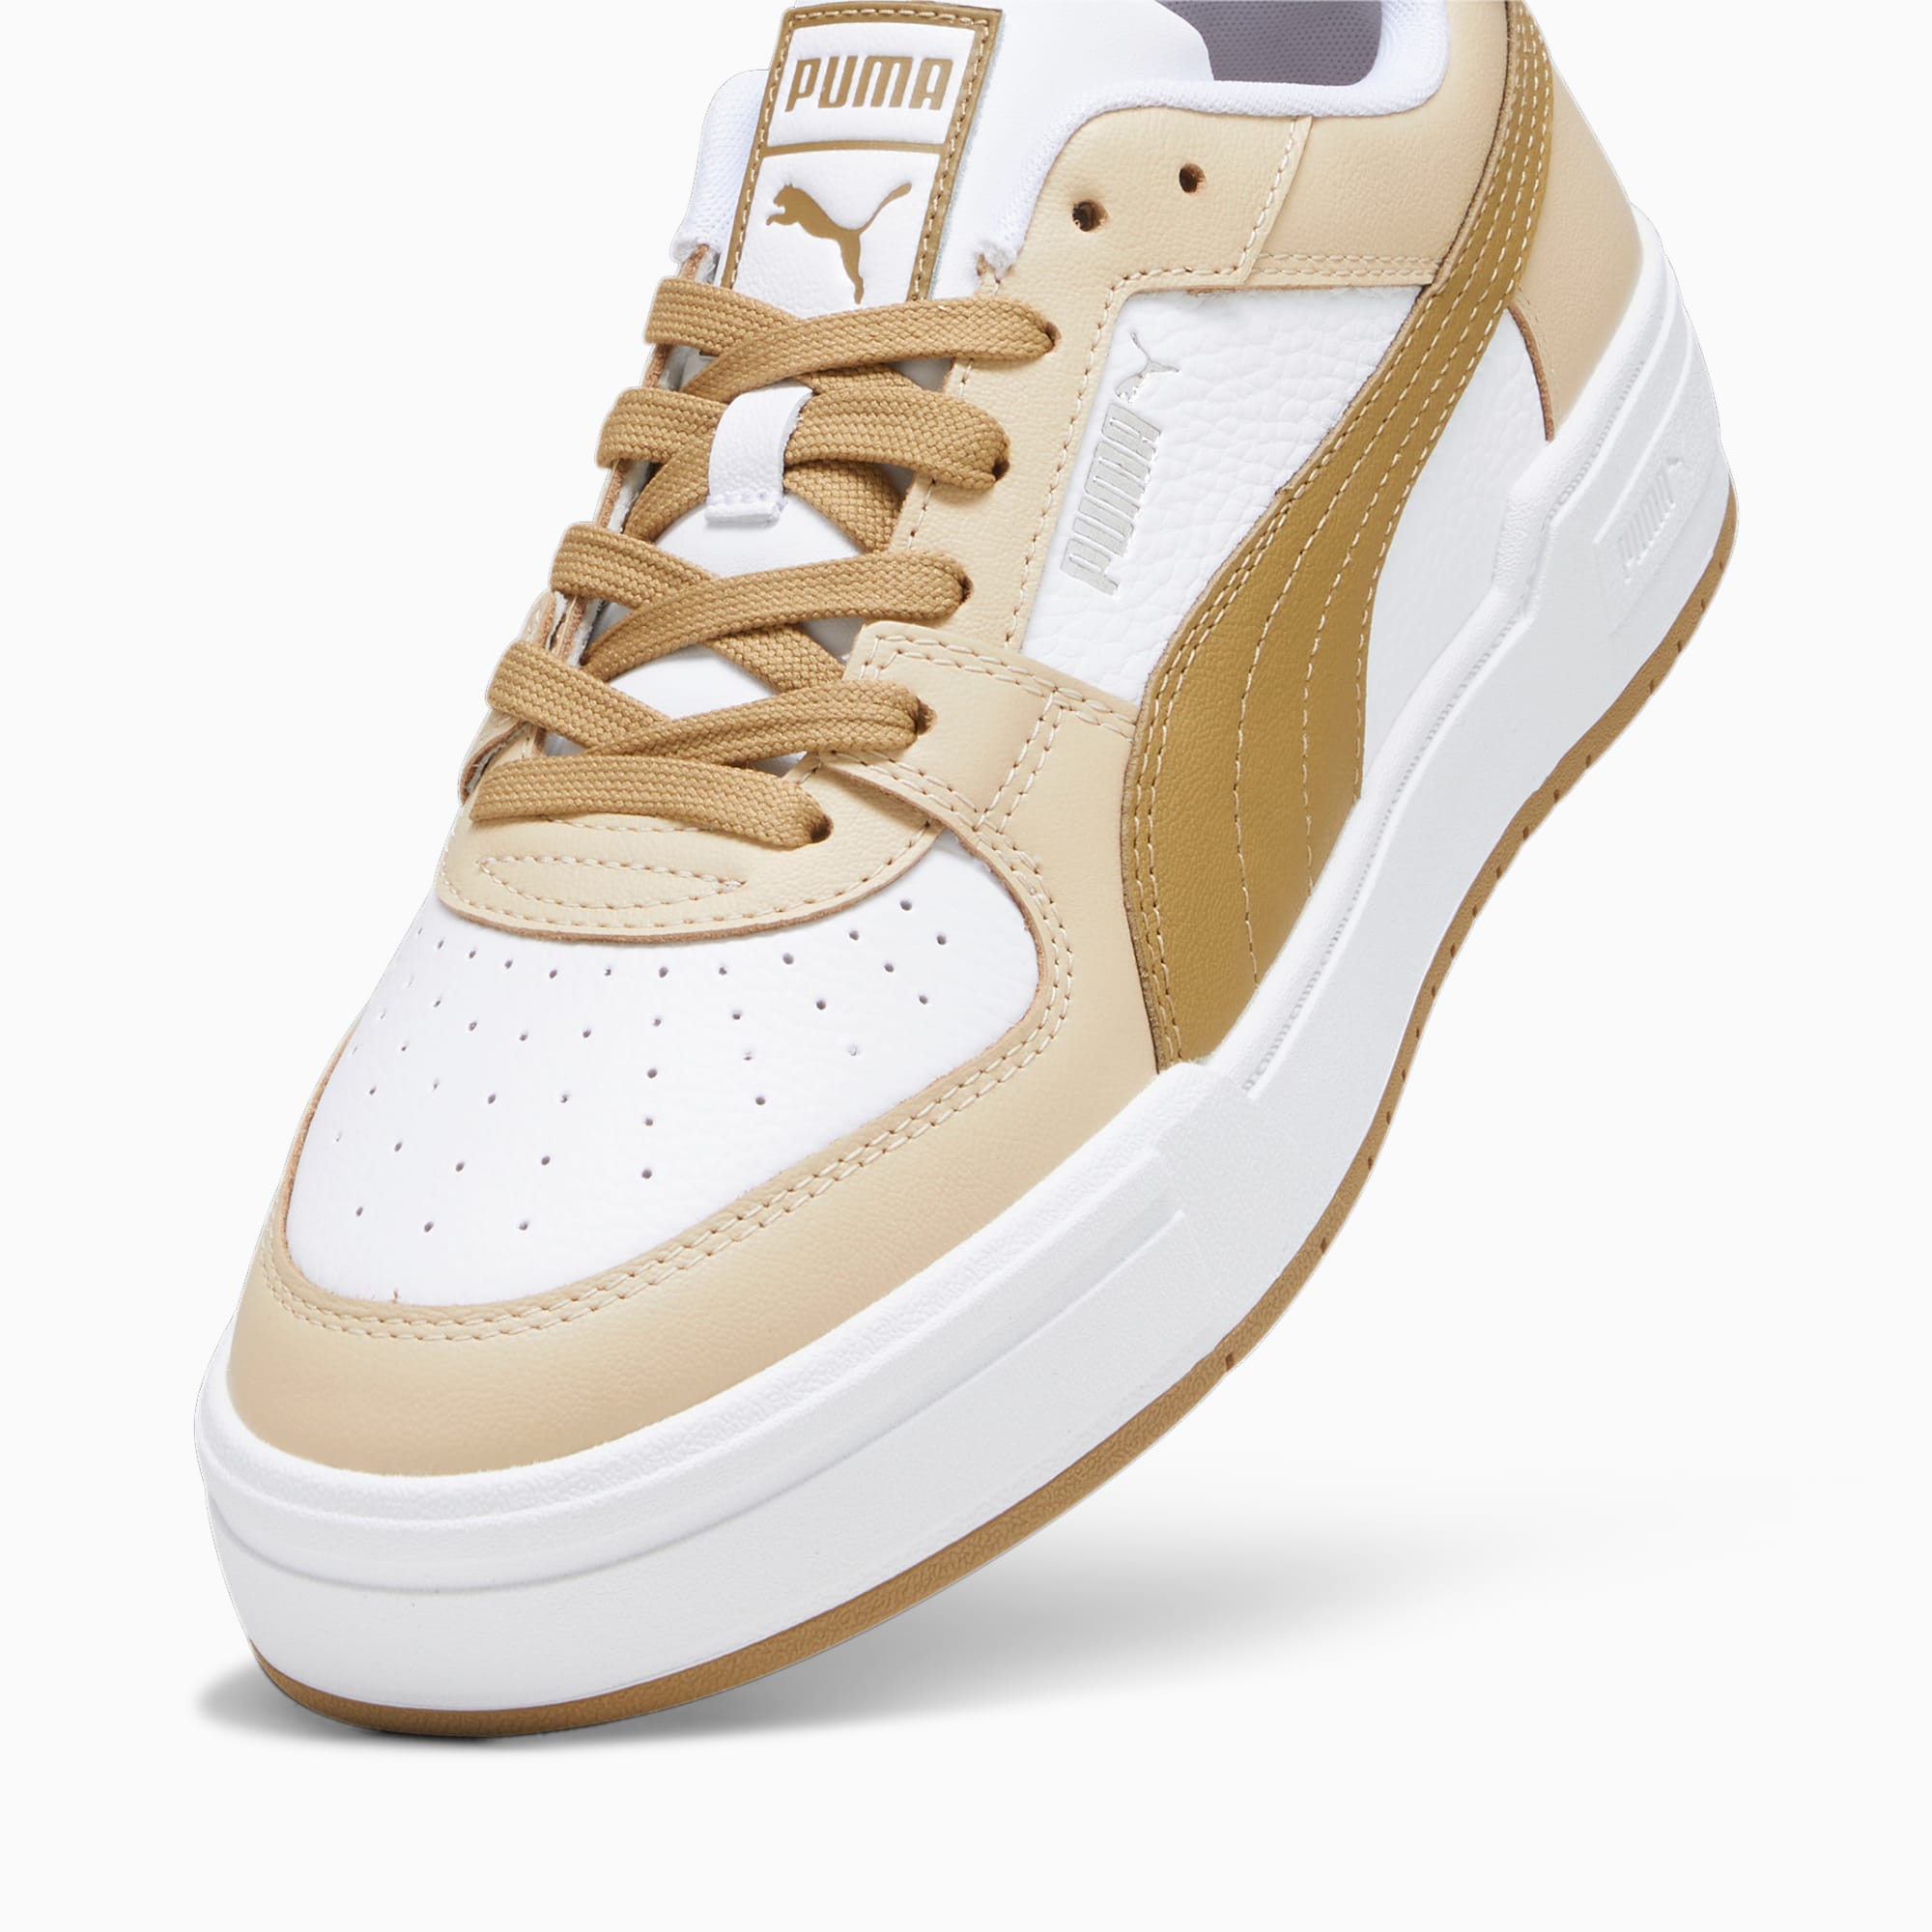 Women's PUMA Ca Pro Classic Trainers, White/Granola/Toasted, Size 44,5, Shoes